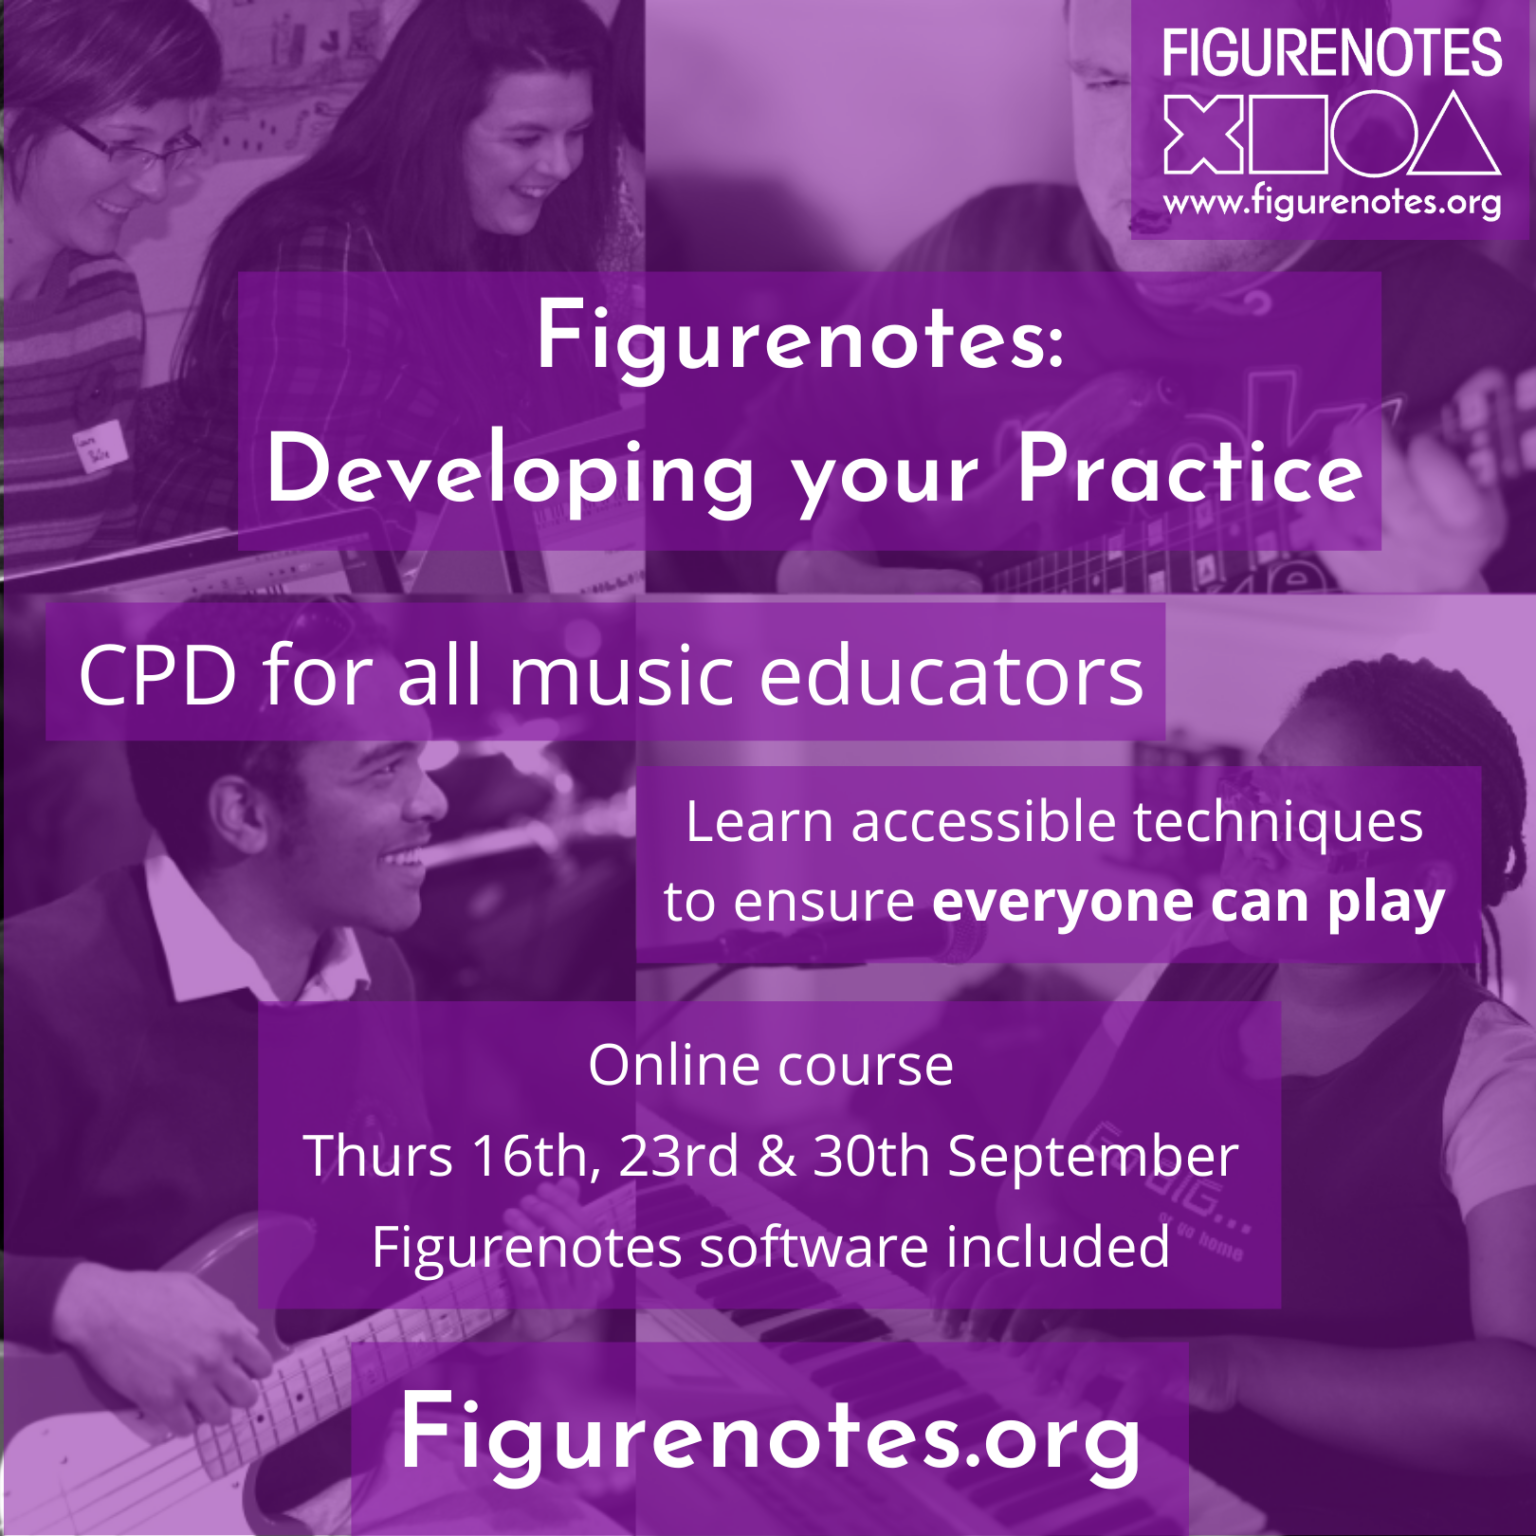 Text reads 'Figurenotes: Developer your Practice. CPD for all music educators. Learn accessible techniques to ensure everyone can play. Online course - Thurs 16th, 23rd, 30th September. Figurenotes software included. Figurenotes.org'